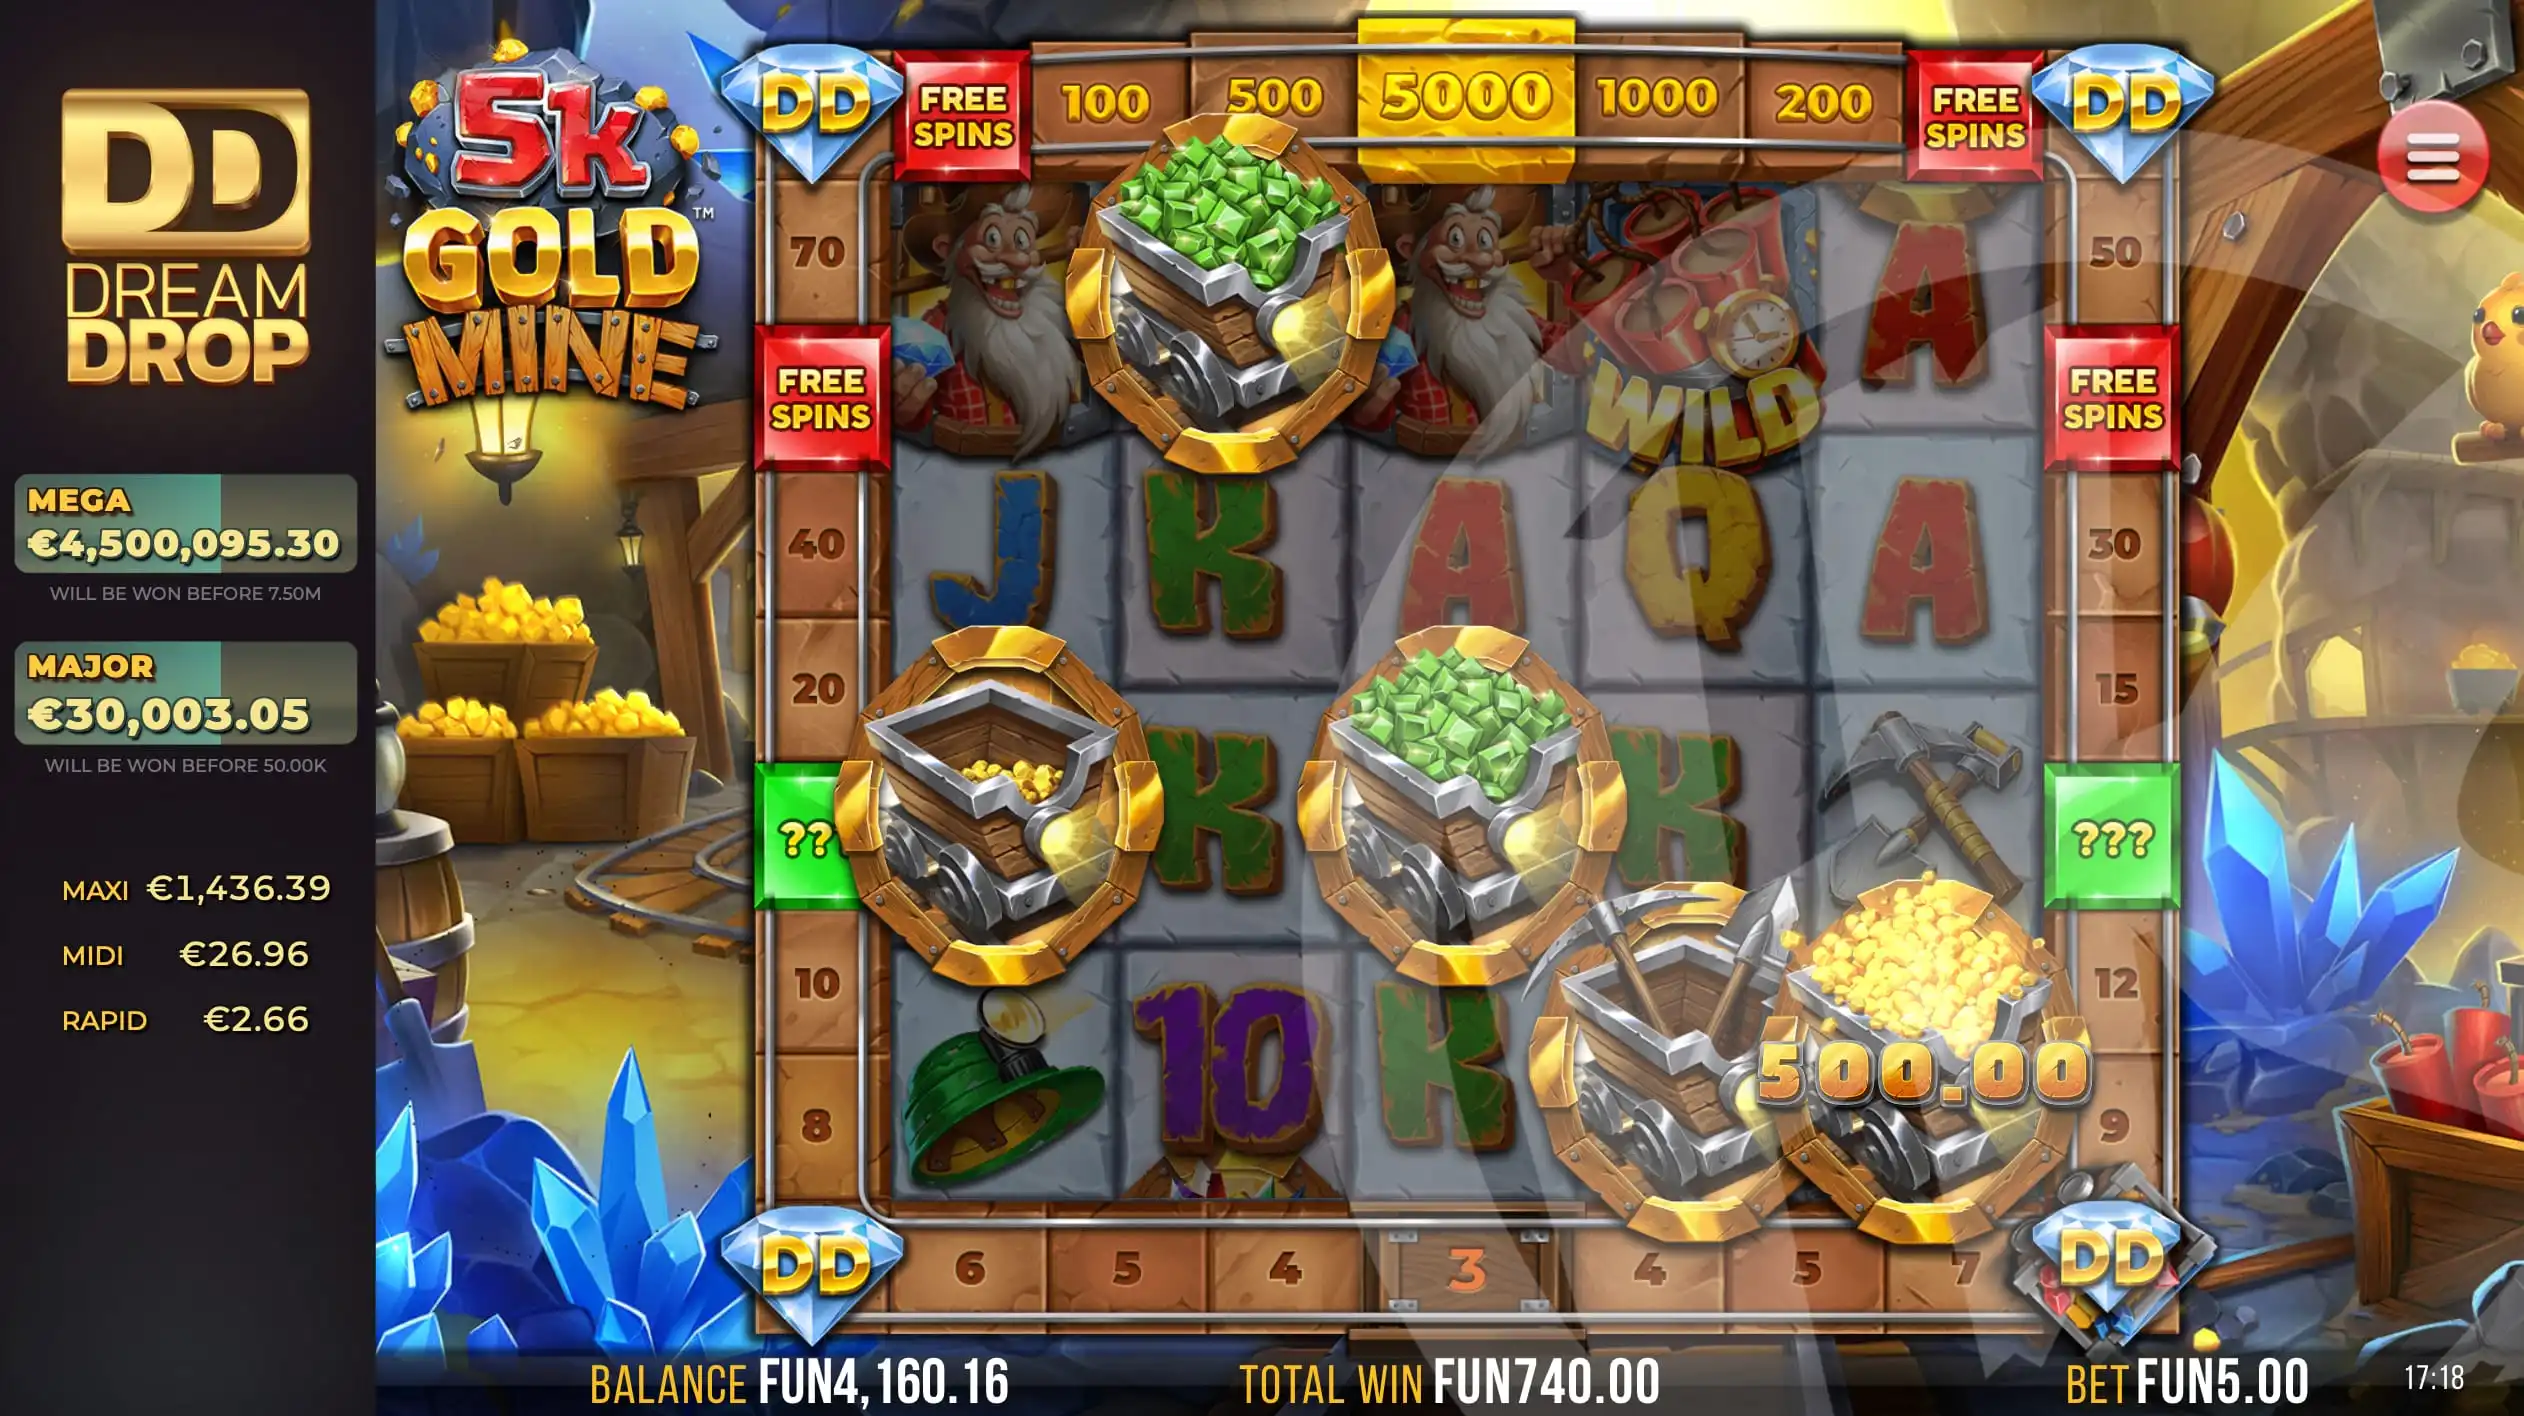 Through Gold Rush Scatters Players Can Move Around the Trail, Trigger Cash Prizes, Trigger the Dream Drop Jackpot Game, Return to the Start, or Collect Trail Prizes, Including Cash, Free Spins, or Mystery Prizes